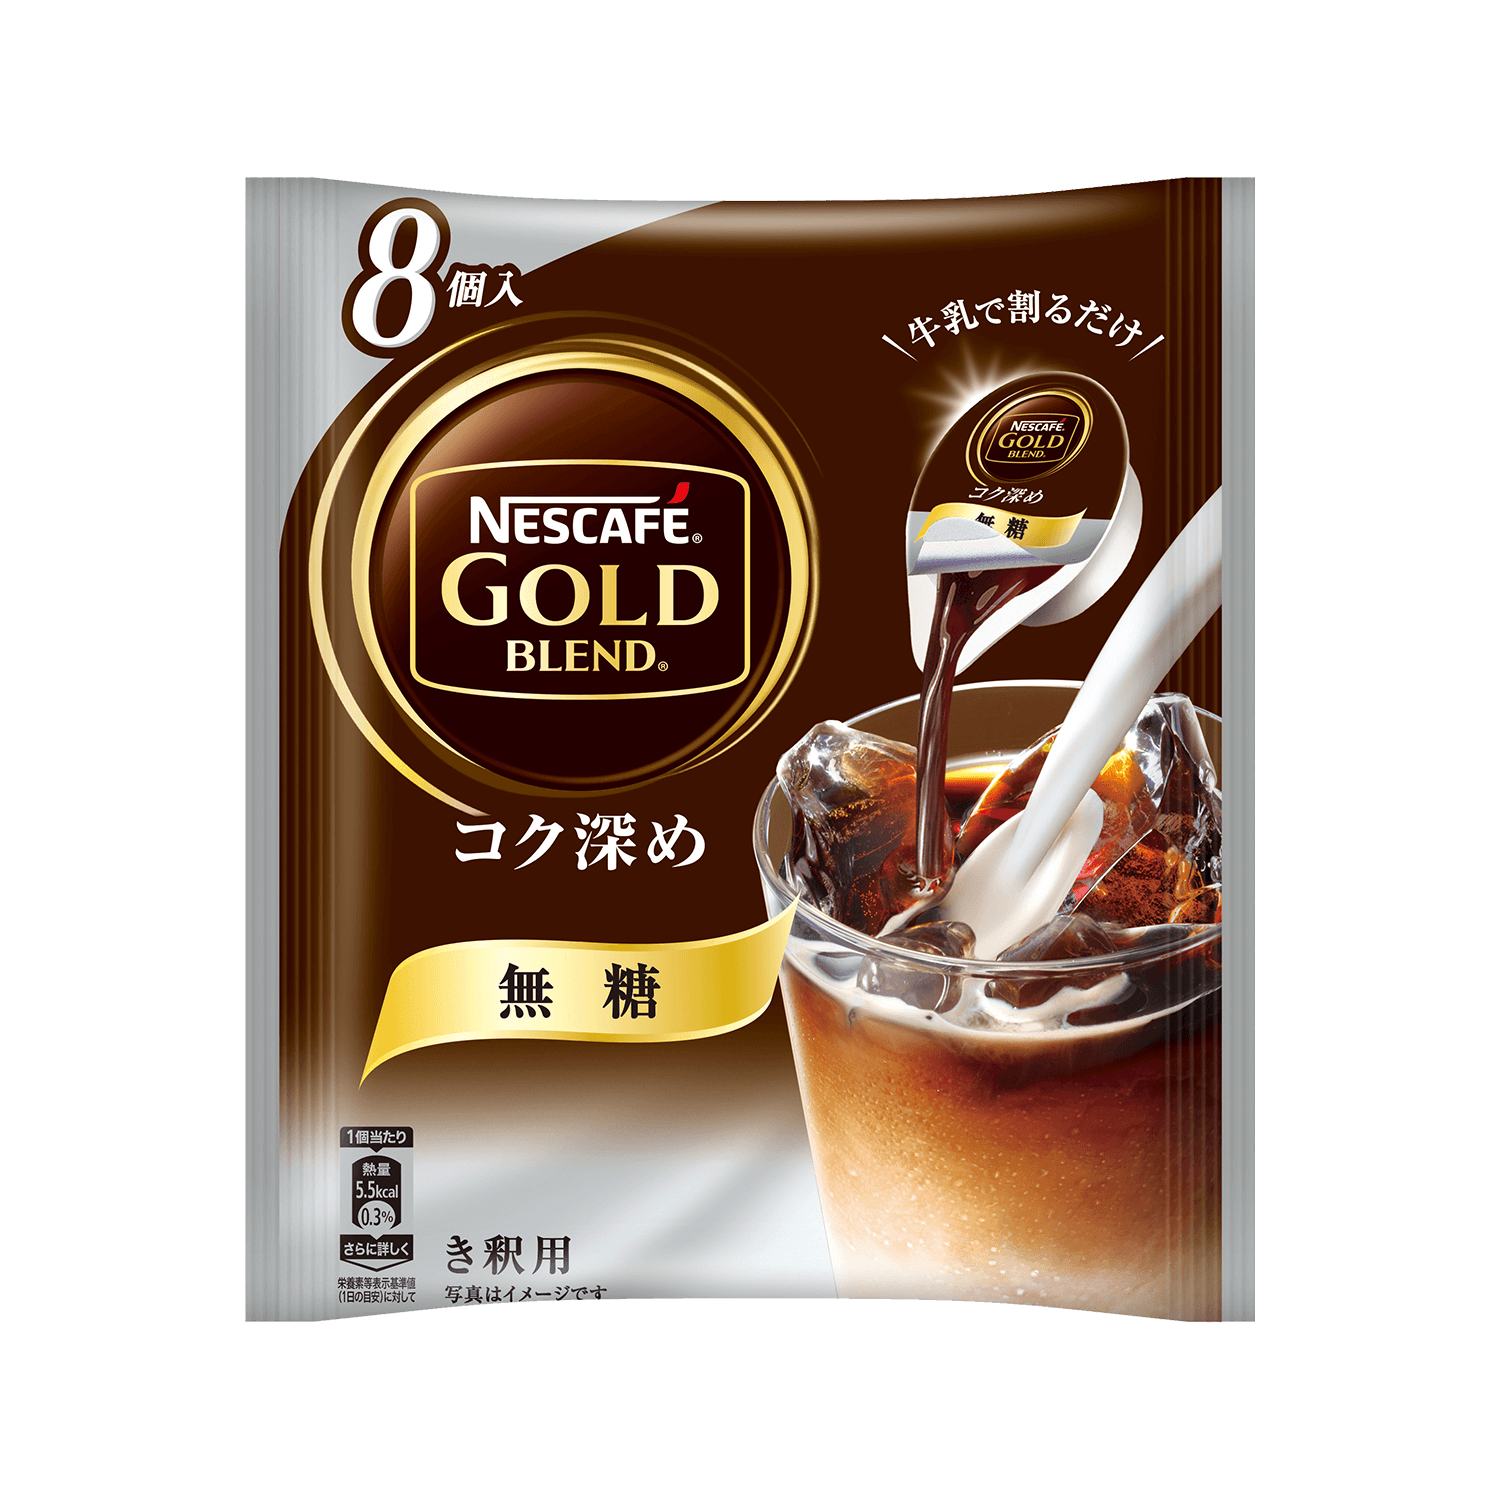 Nescafe-Gold-Blend-Unsweetened-Coffee-Concentrate-8-Cups--Pack-of-3--1-2023-11-17T07:04:37.255Z.png